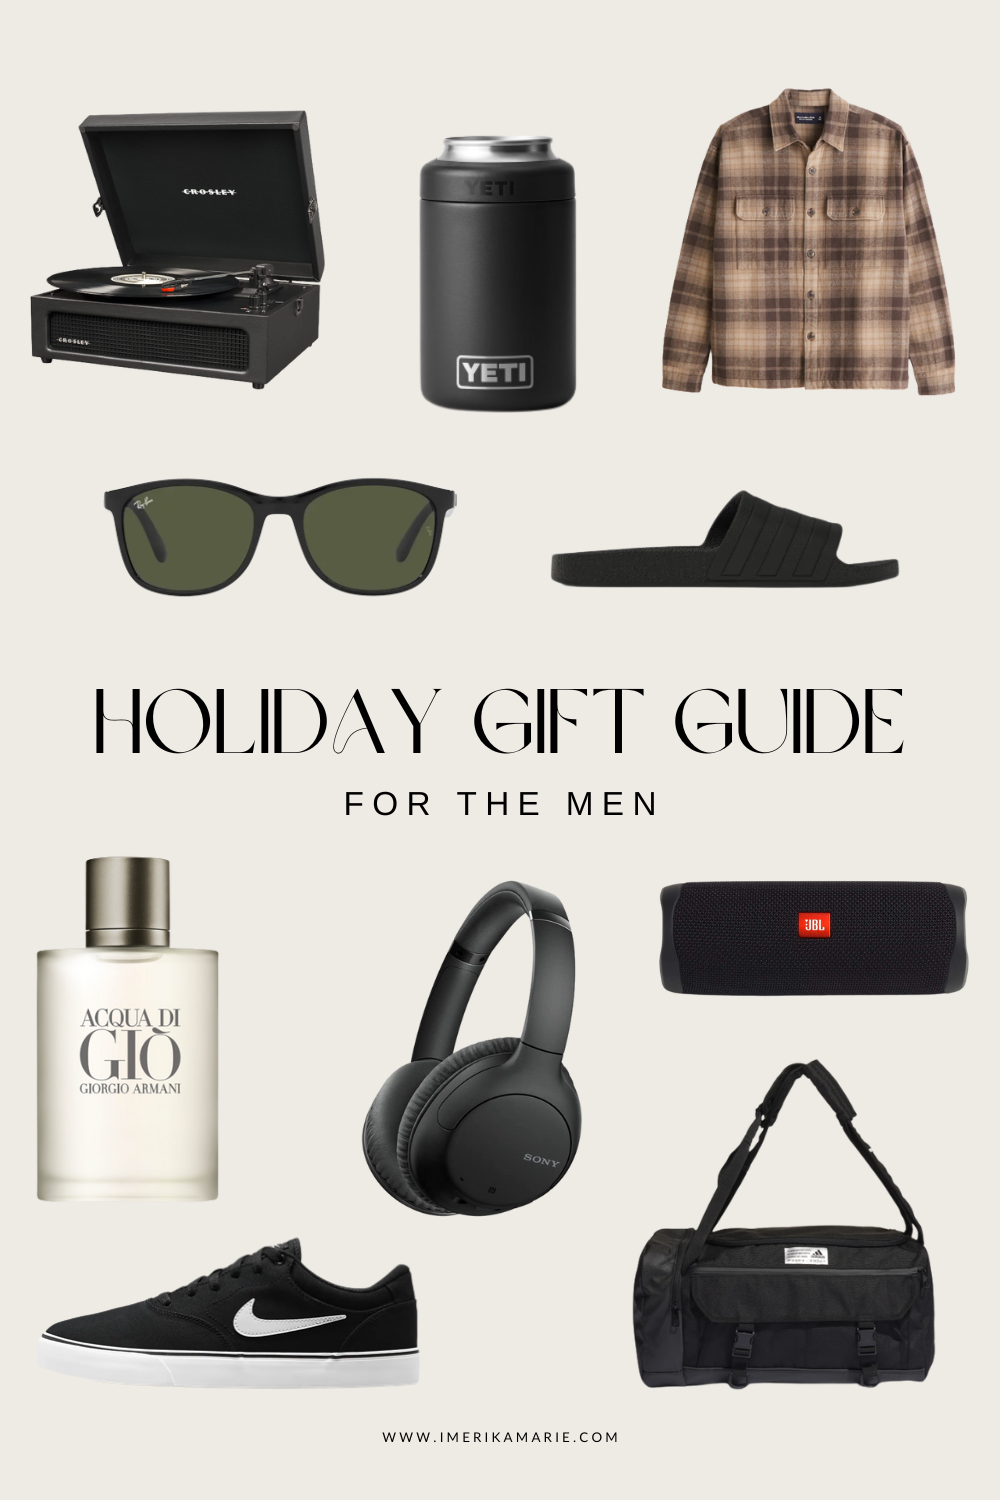 The Ultimate Holiday Gift Guide for the Fitness Lover in Your Life